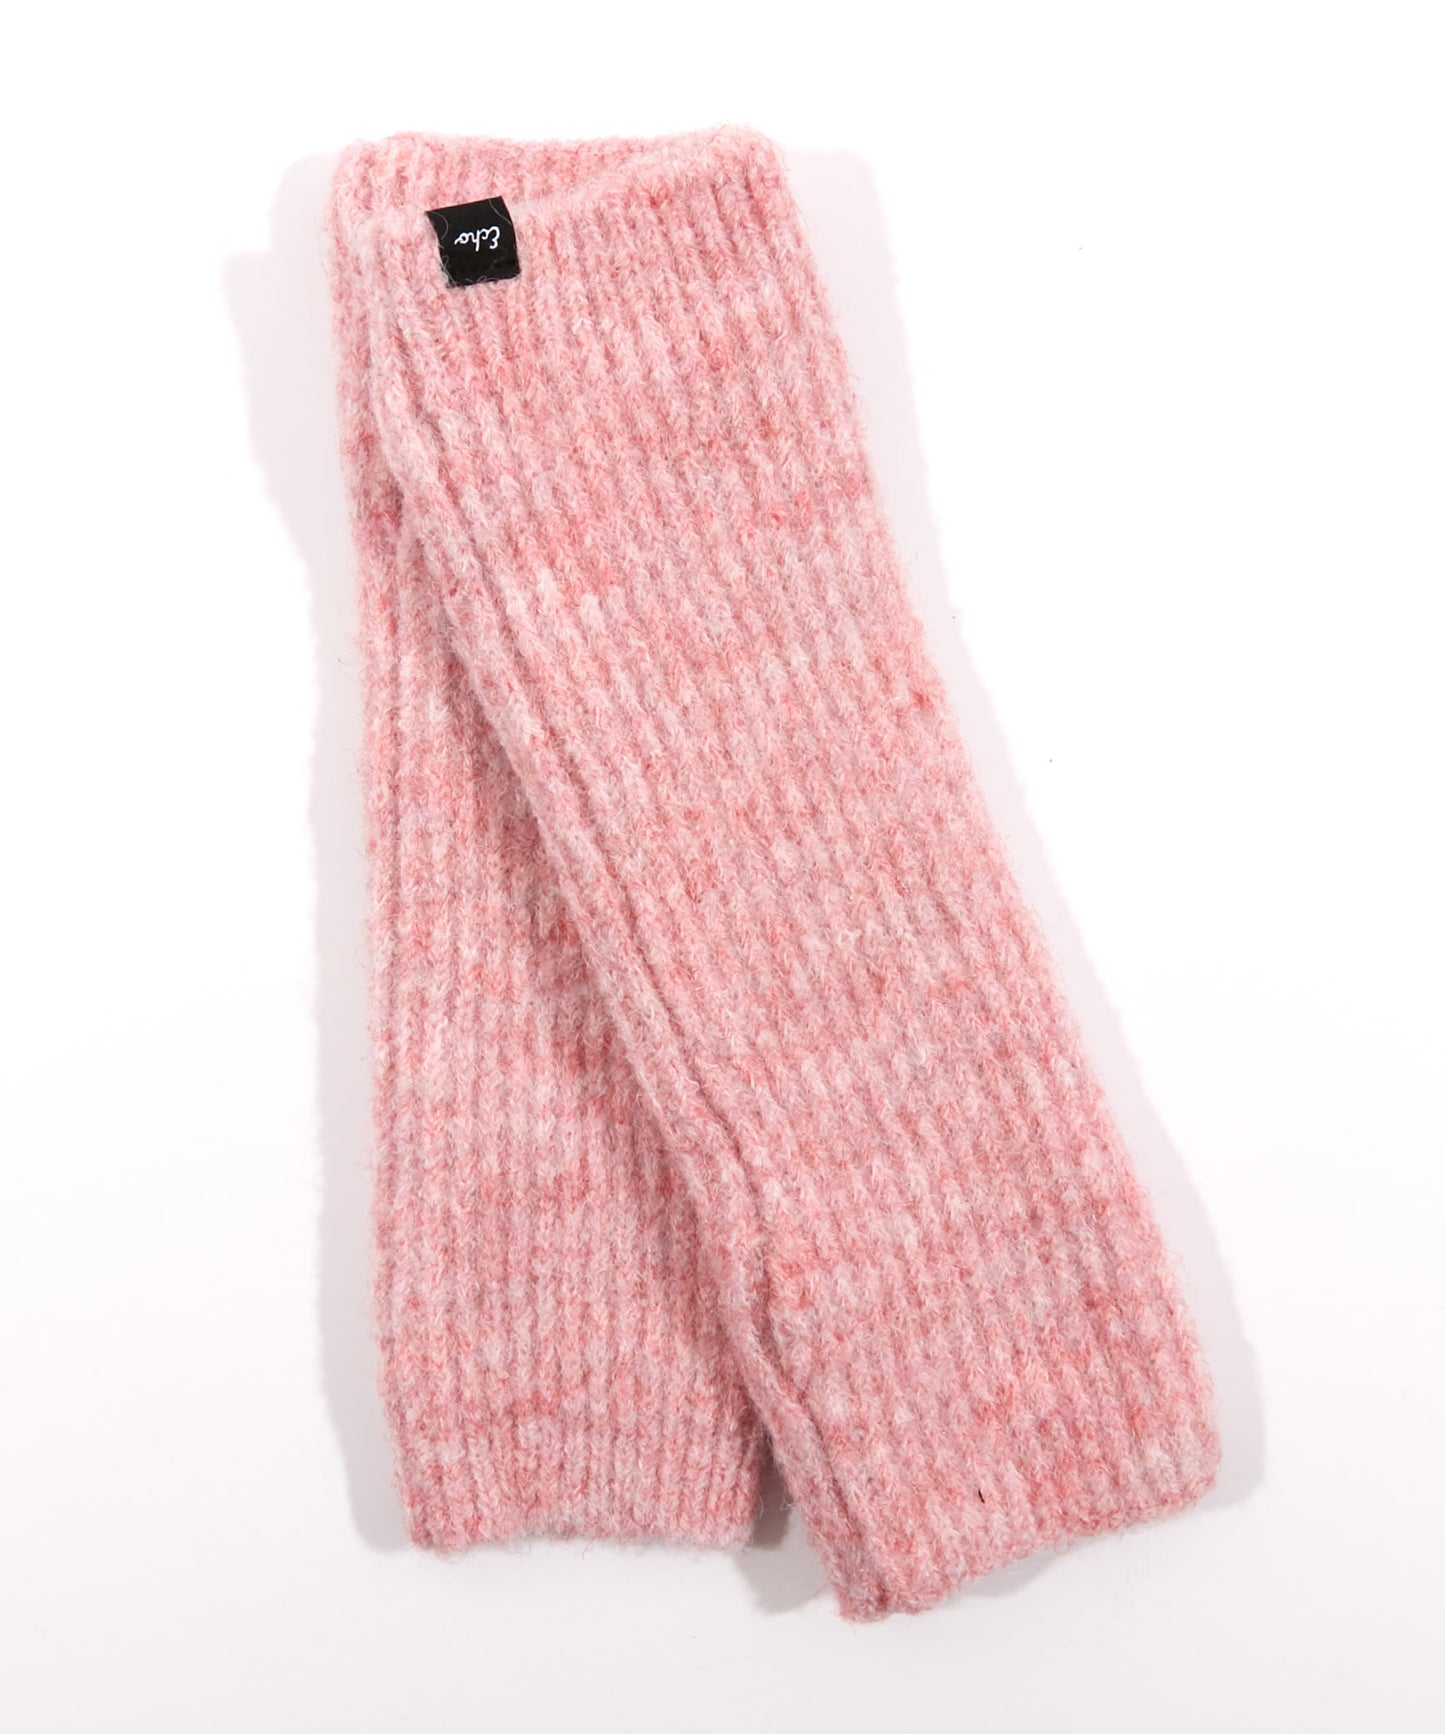 Plush Ribbed Armwarmers in color Peony